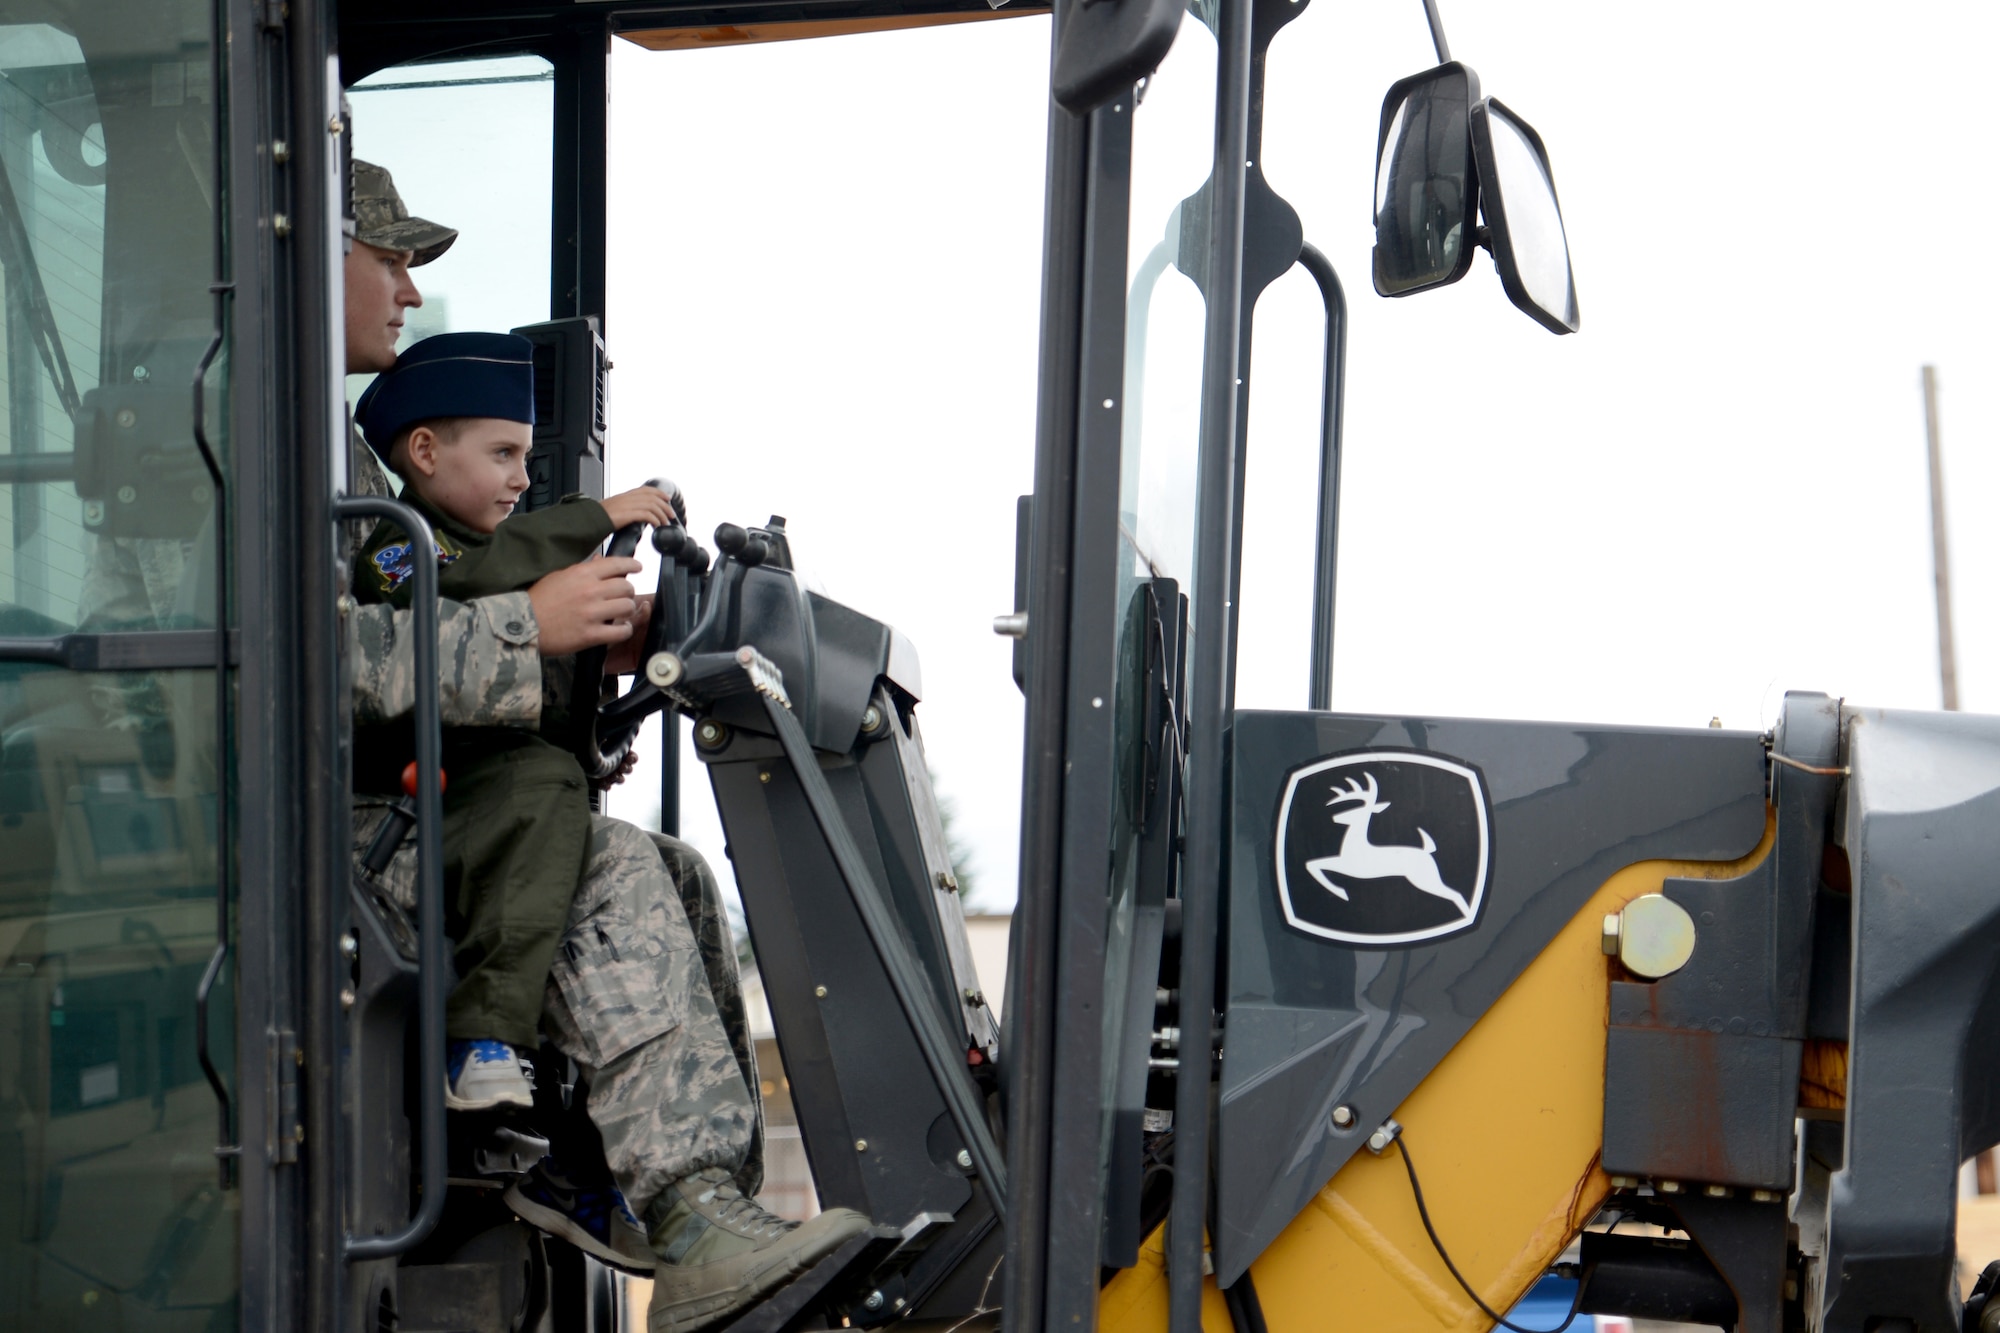 Ewan McFadgen, Pilot for a Day, controls a road grader with the help of Staff Sgt. Joseph Farrell, 627th Civil Engineer Squadron equipment and pavement craftsman, July 10, 2015, during his tour of Joint Base Lewis-McChord, Wash. McFadgen was able to operate and view demonstrations of some of the equipment that 627th CES Airmen use every day. (U.S. Air Force photo/Airman 1st Class Keoni Chavarria)